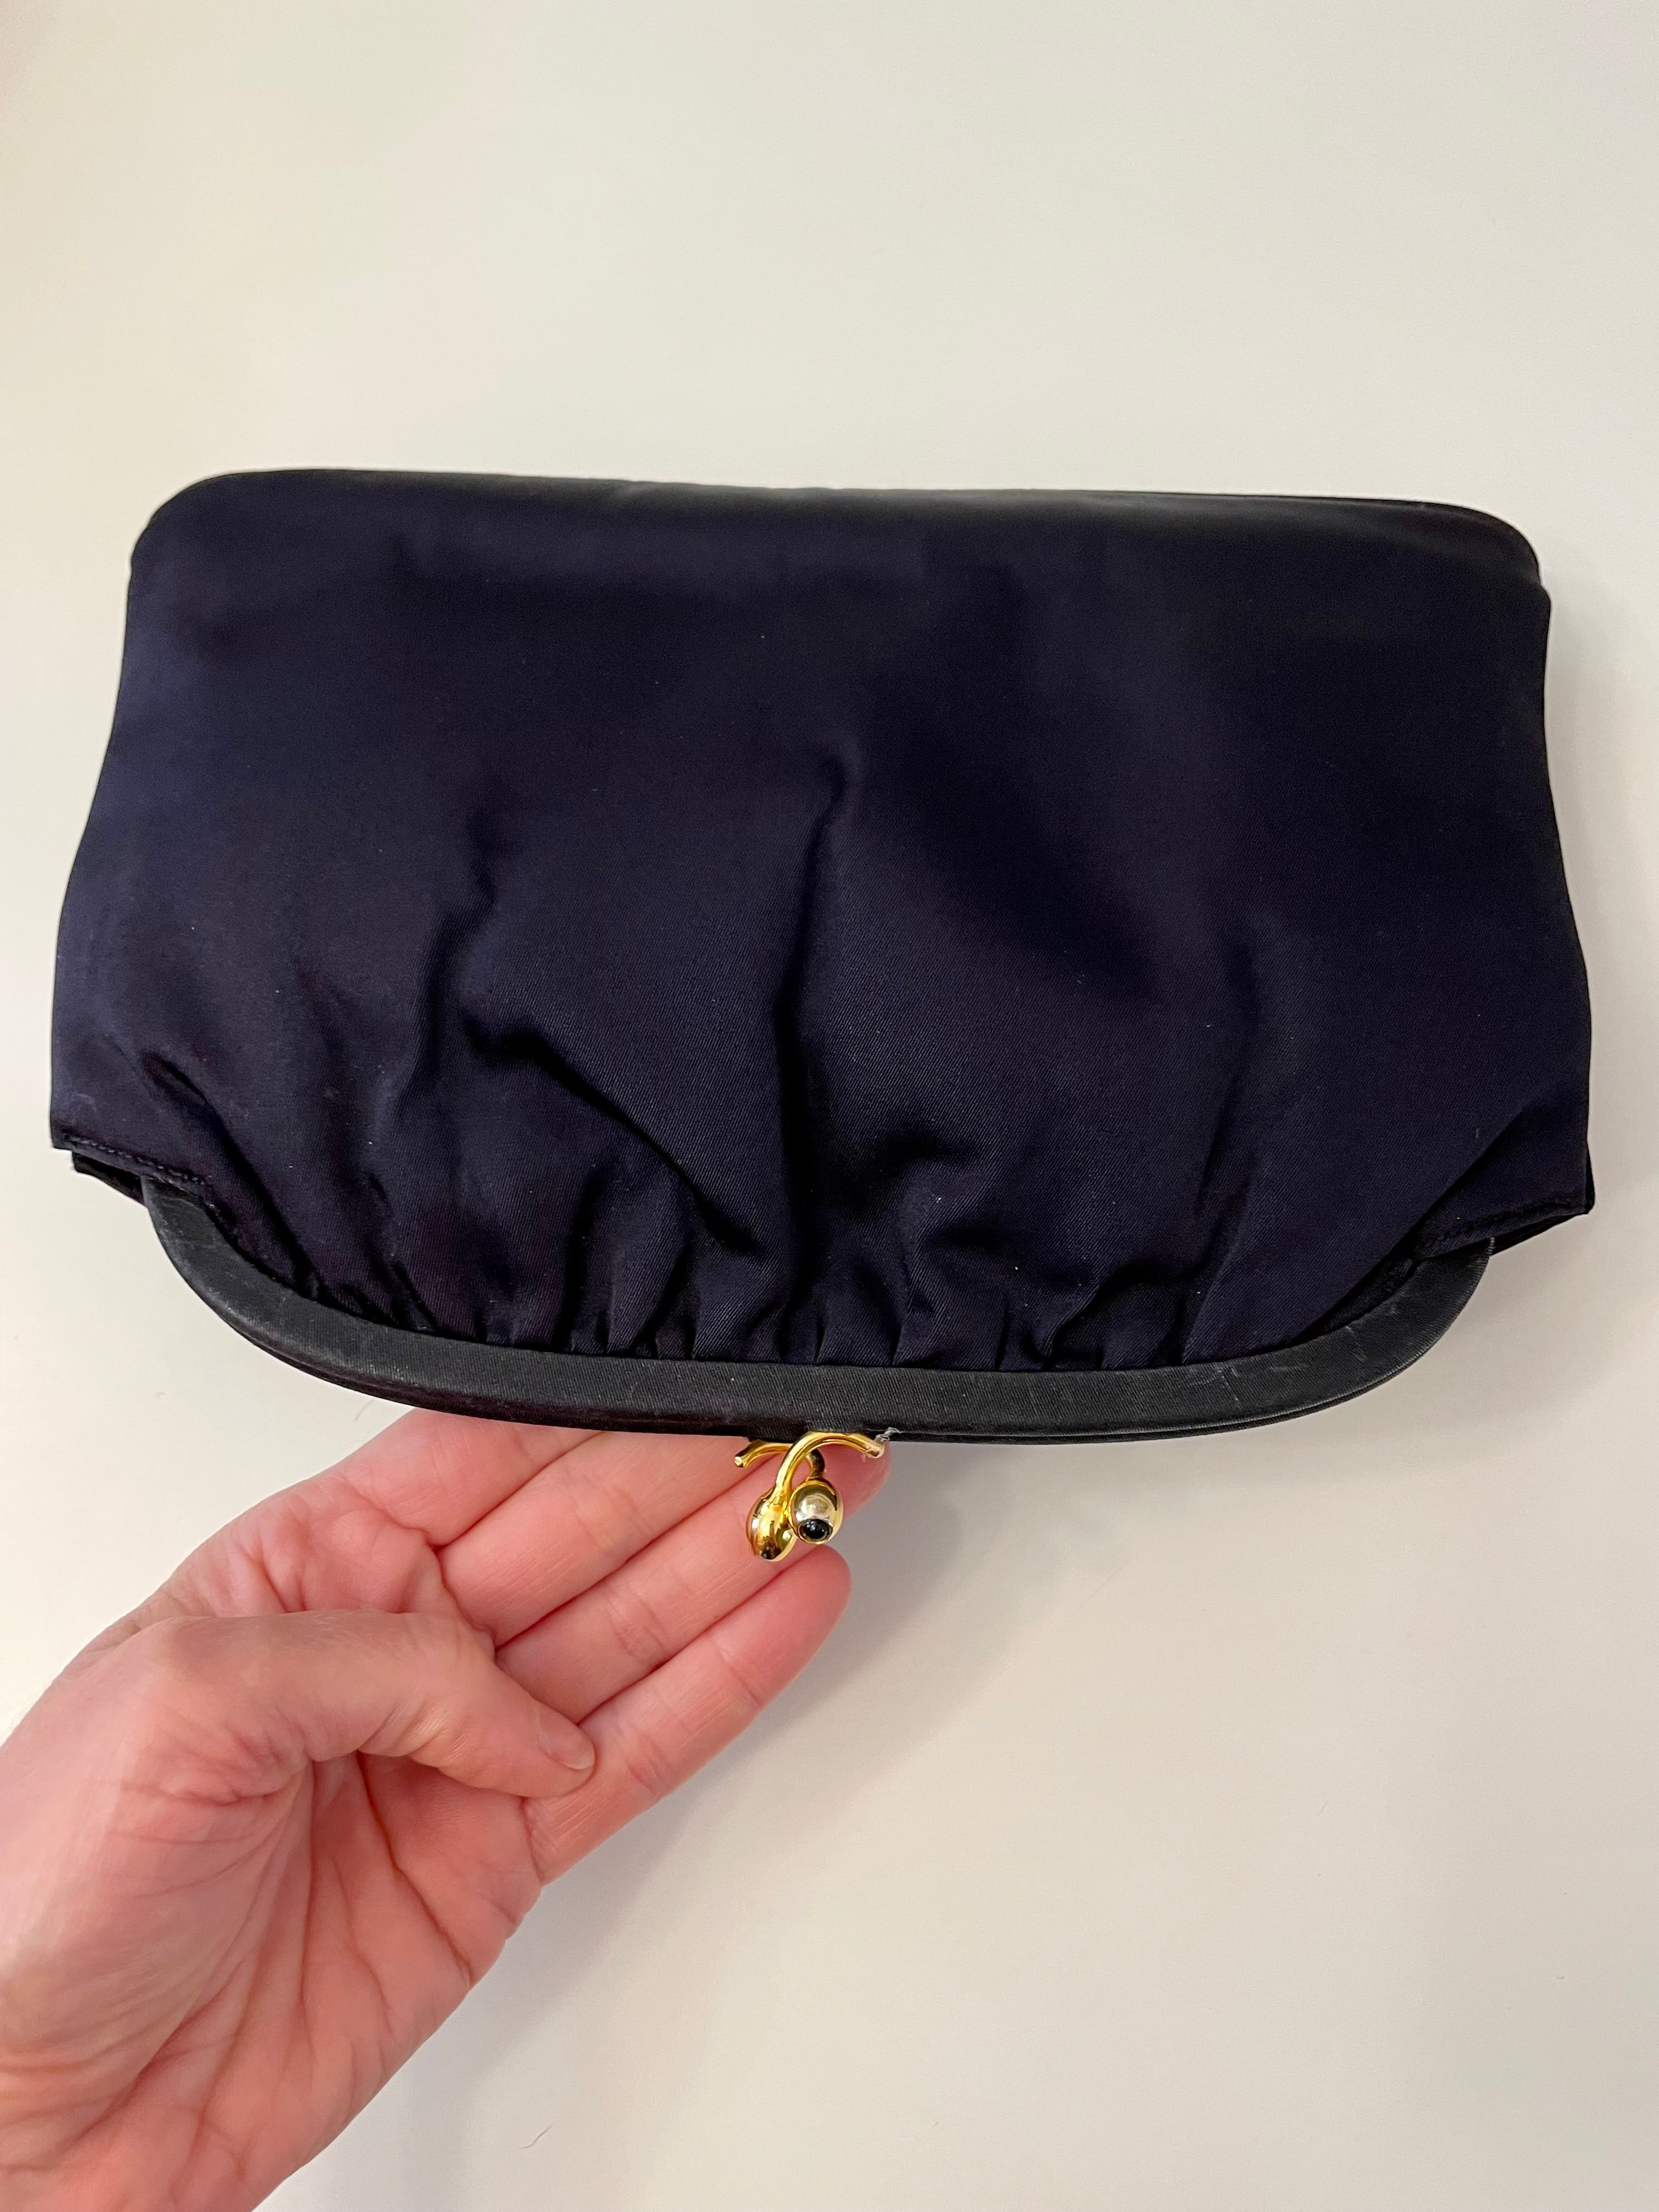 The Socialite and her love of the classic noir satin evening bag... this one is absolutely elegant!